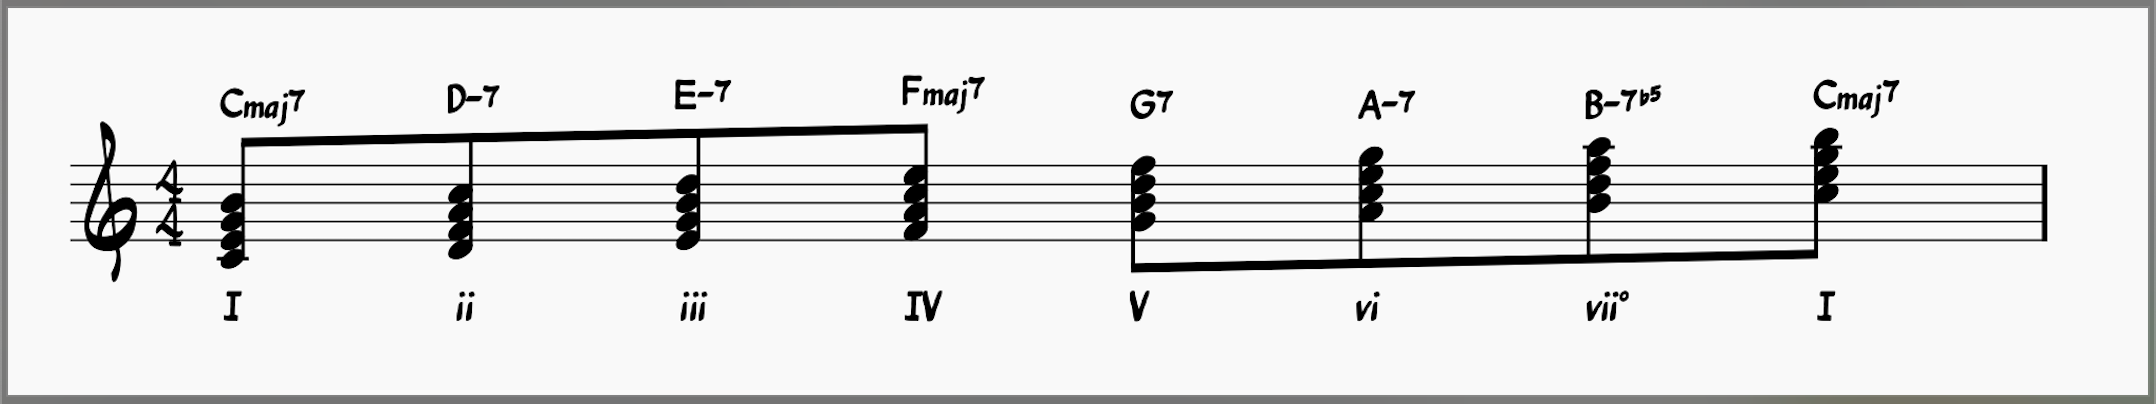 Chords in the key of C major